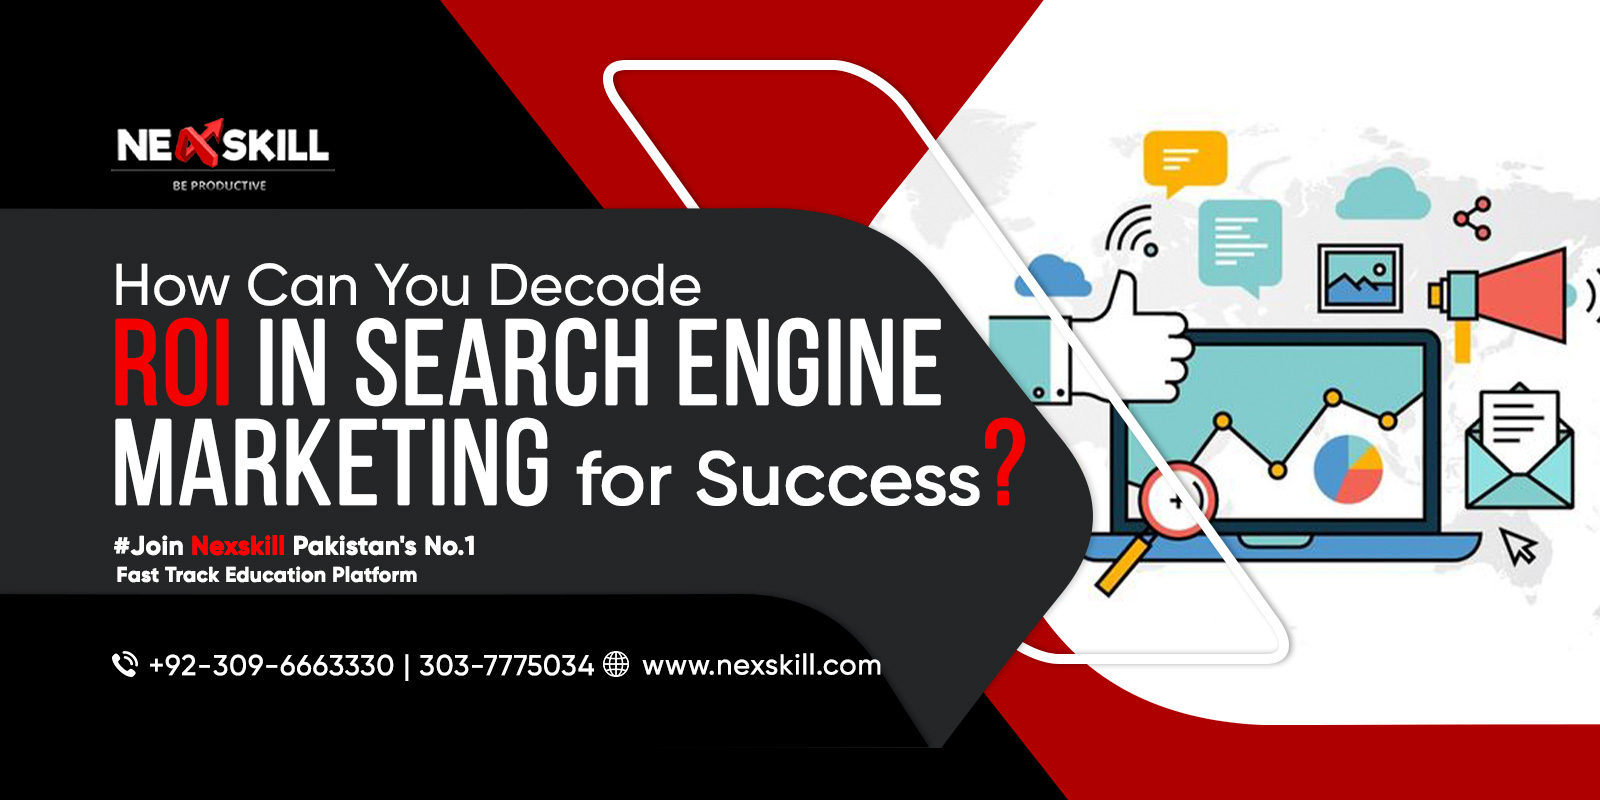 How Can You Decode ROI in Search Engine Marketing for Success?